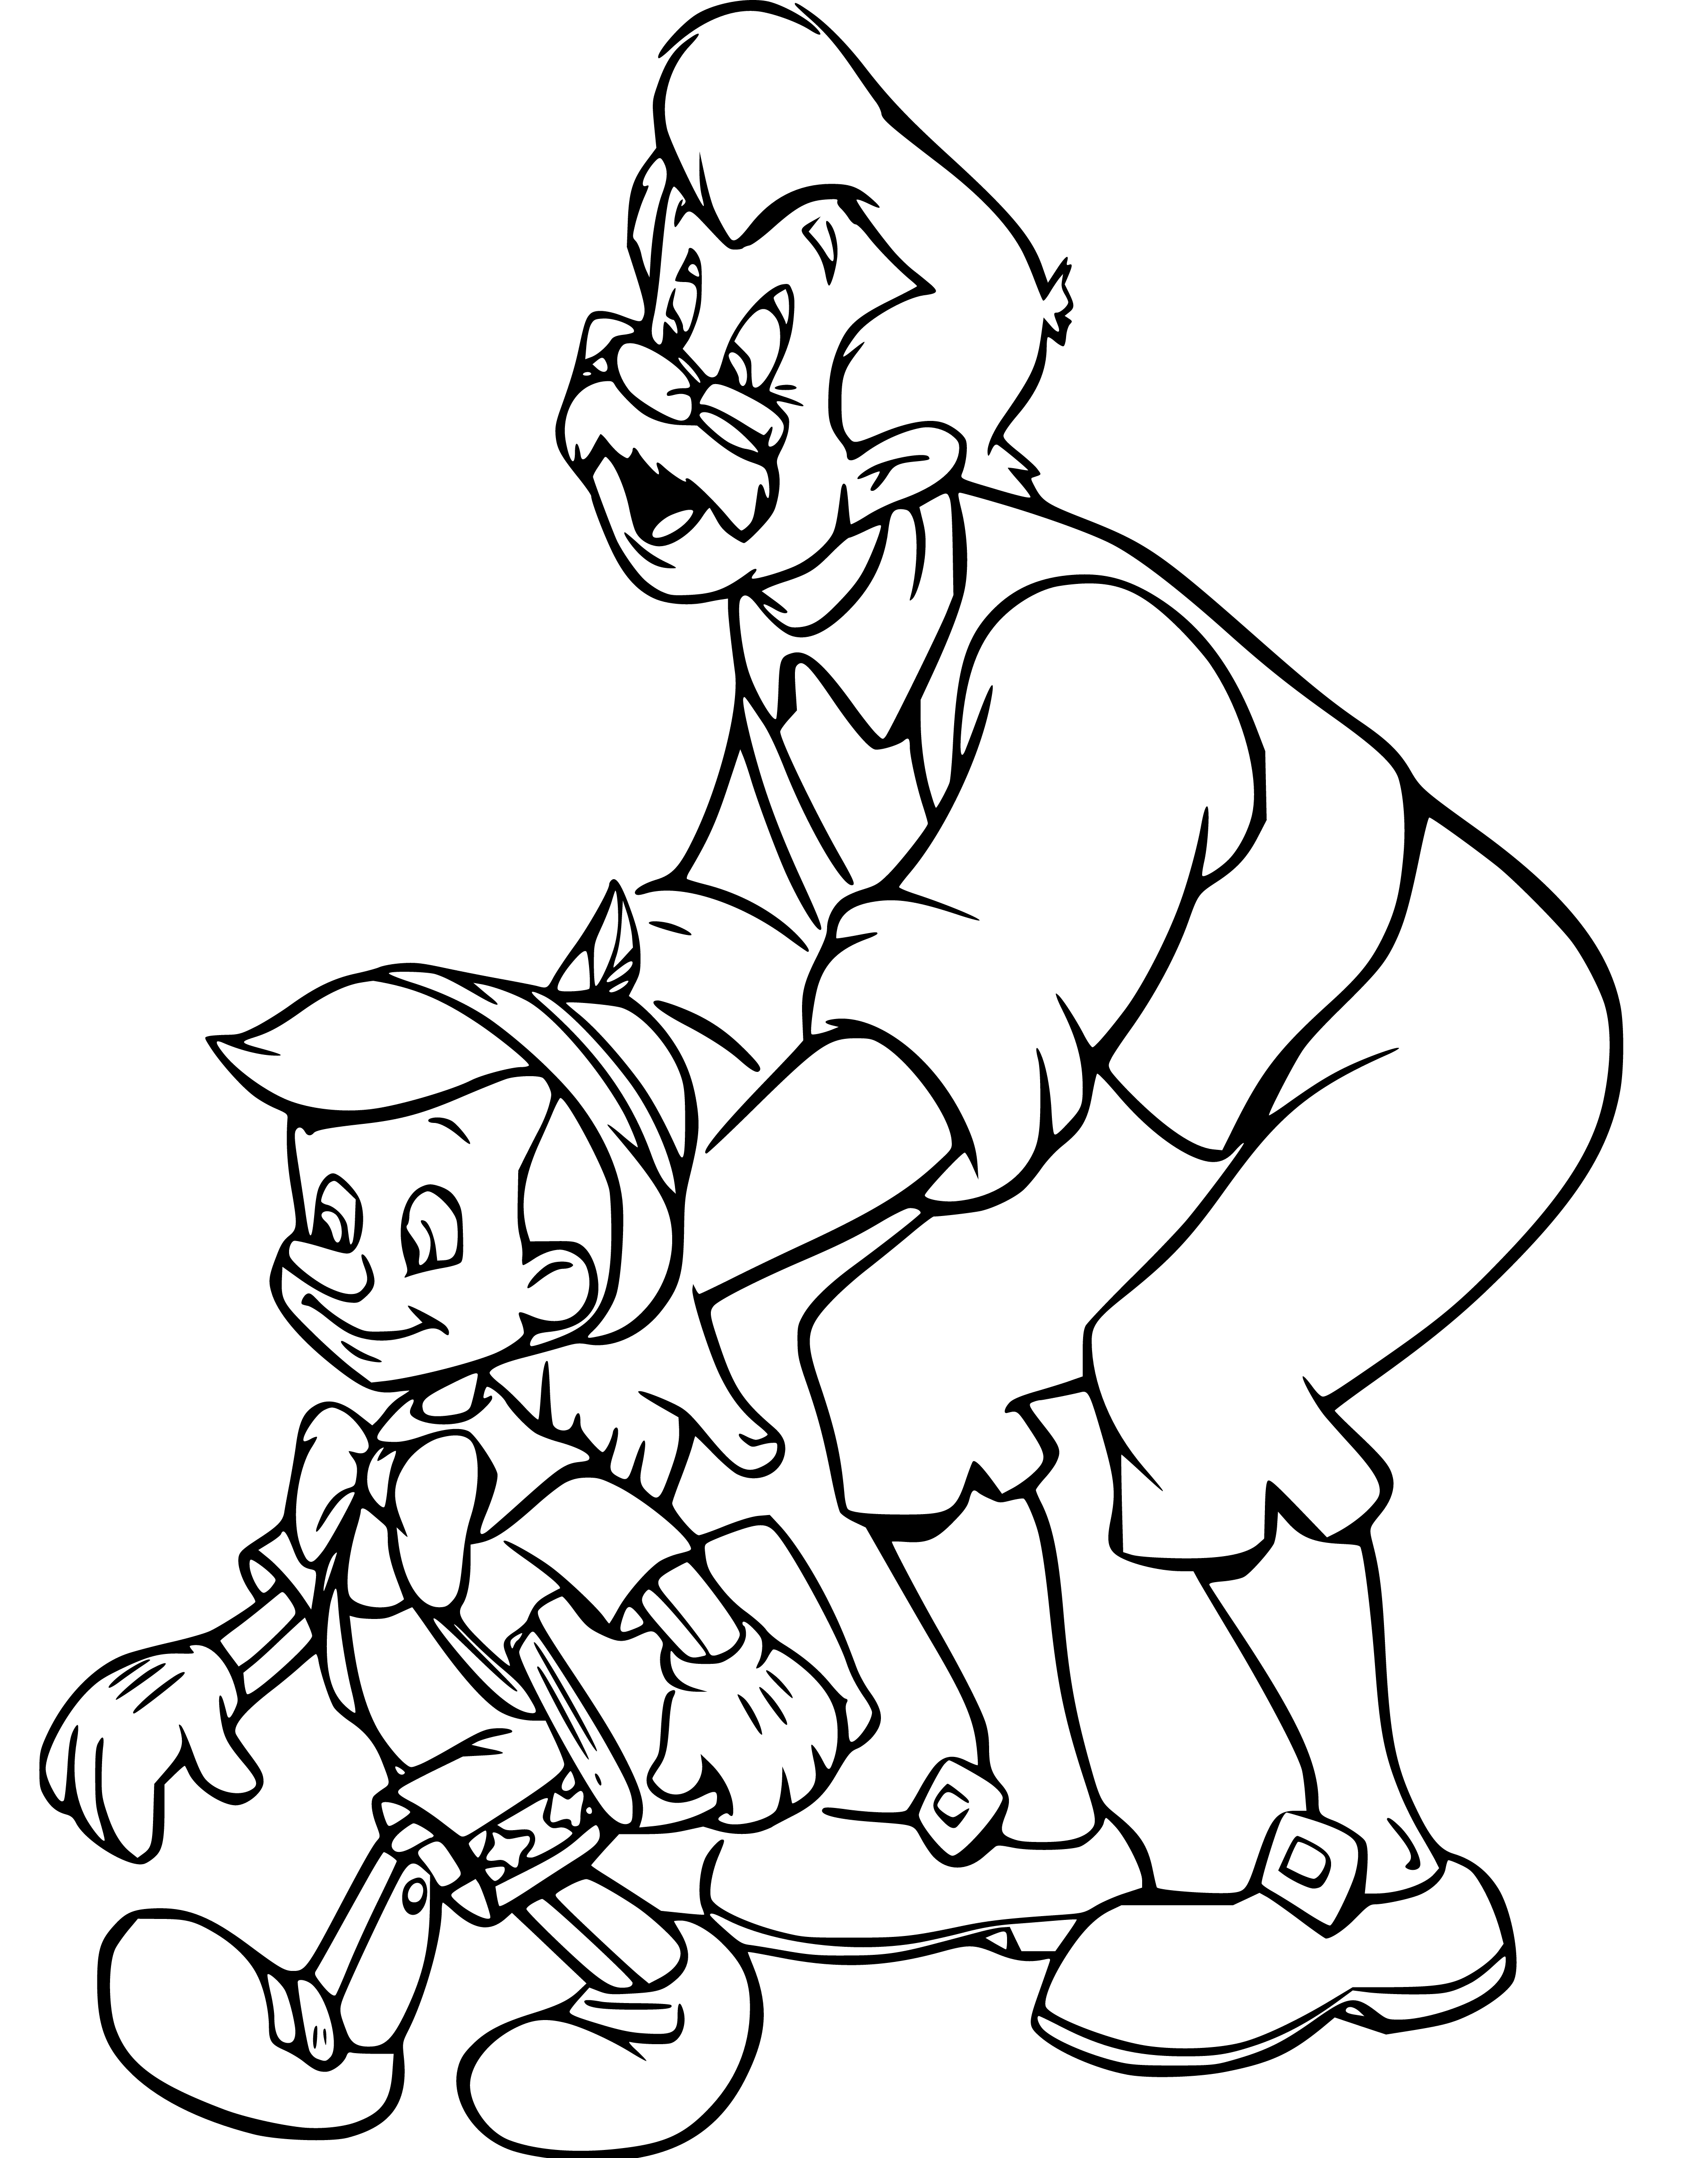 Geppetto and Pinocchio Coloring Pages for Kids - SheetalColor.com